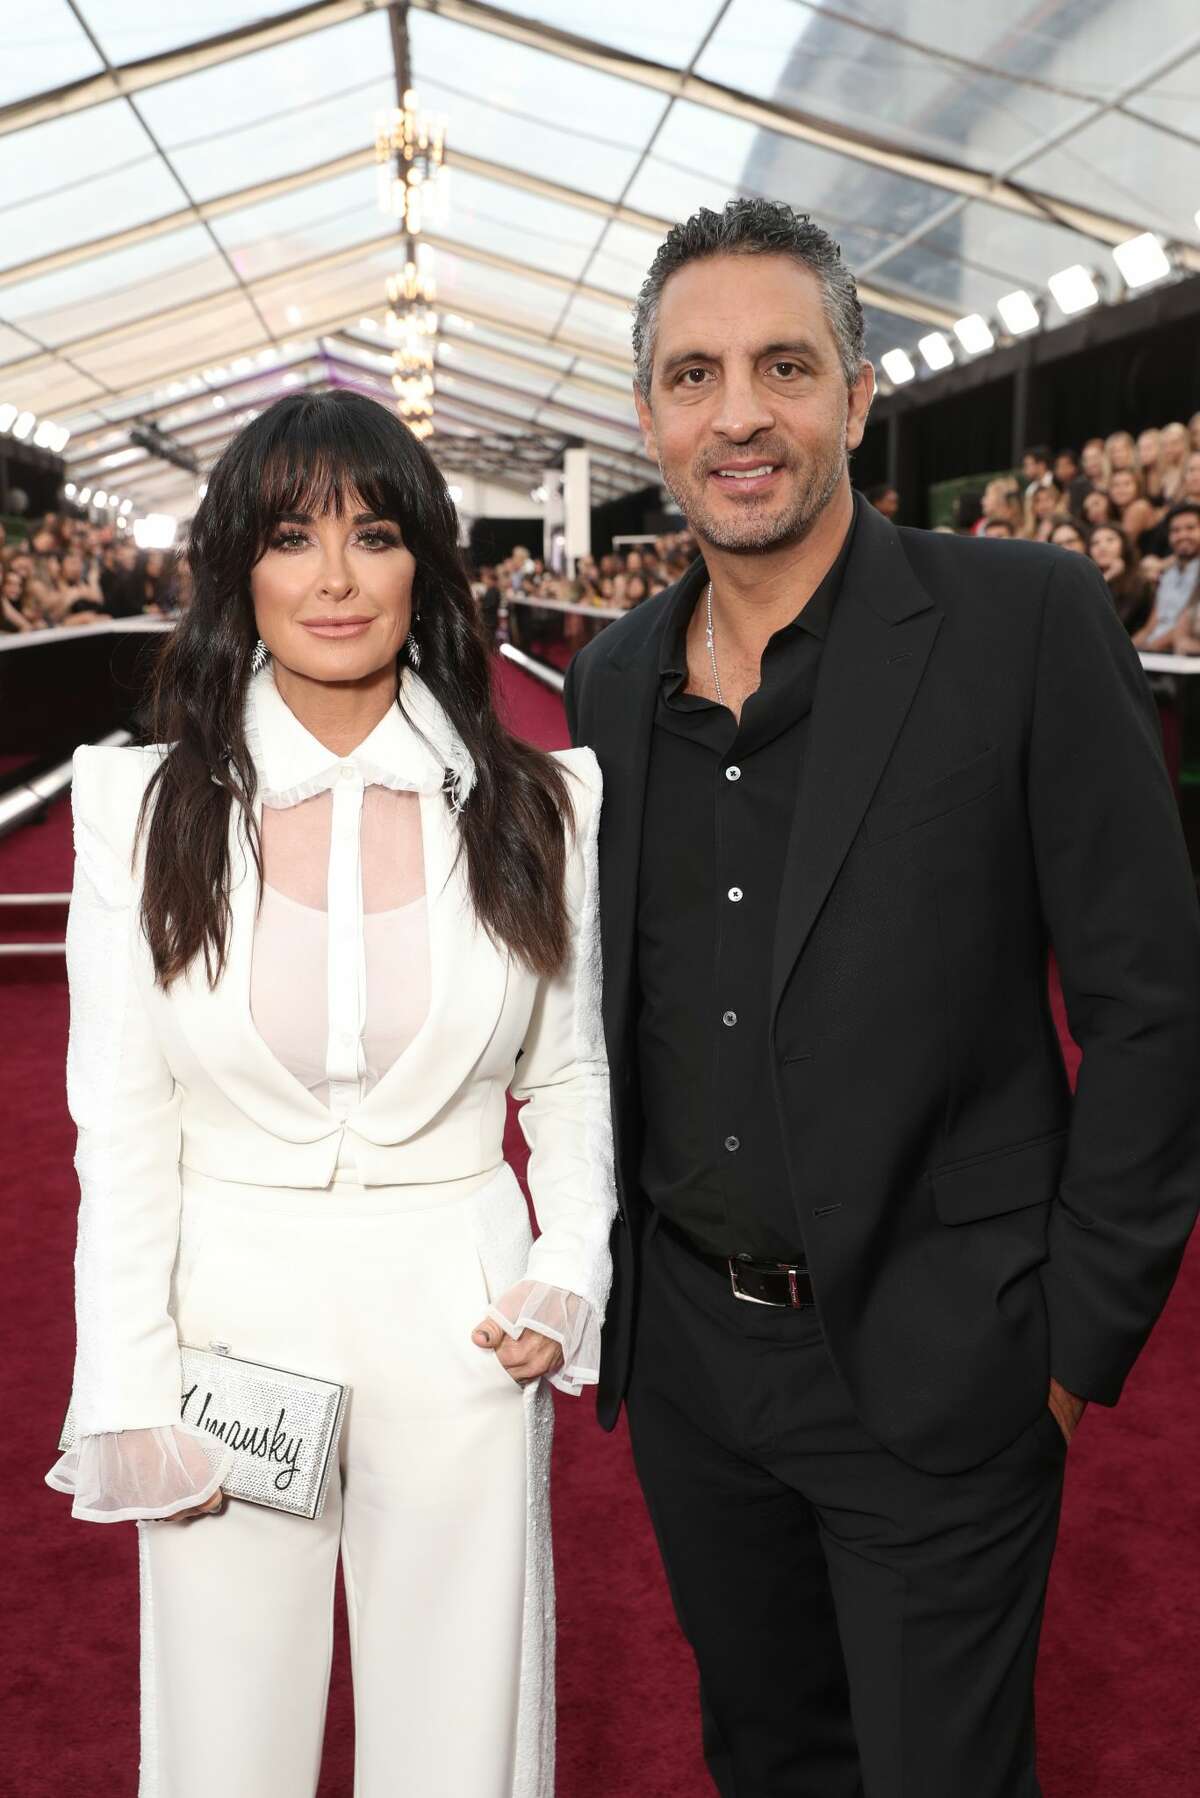 SANTA MONICA, CALIFORNIA - NOVEMBER 10: 2019 E! PEOPLE'S CHOICE AWARDS -- Pictured: (l-r) Kyle Richards and Mauricio Umansky arrive to the 2019 E! People's Choice Awards held at the Barker Hangar on November 10, 2019. -- NUP_188990 (Photo by Todd Williamson/E! Entertainment/NBCU Photo Bank via Getty Images)